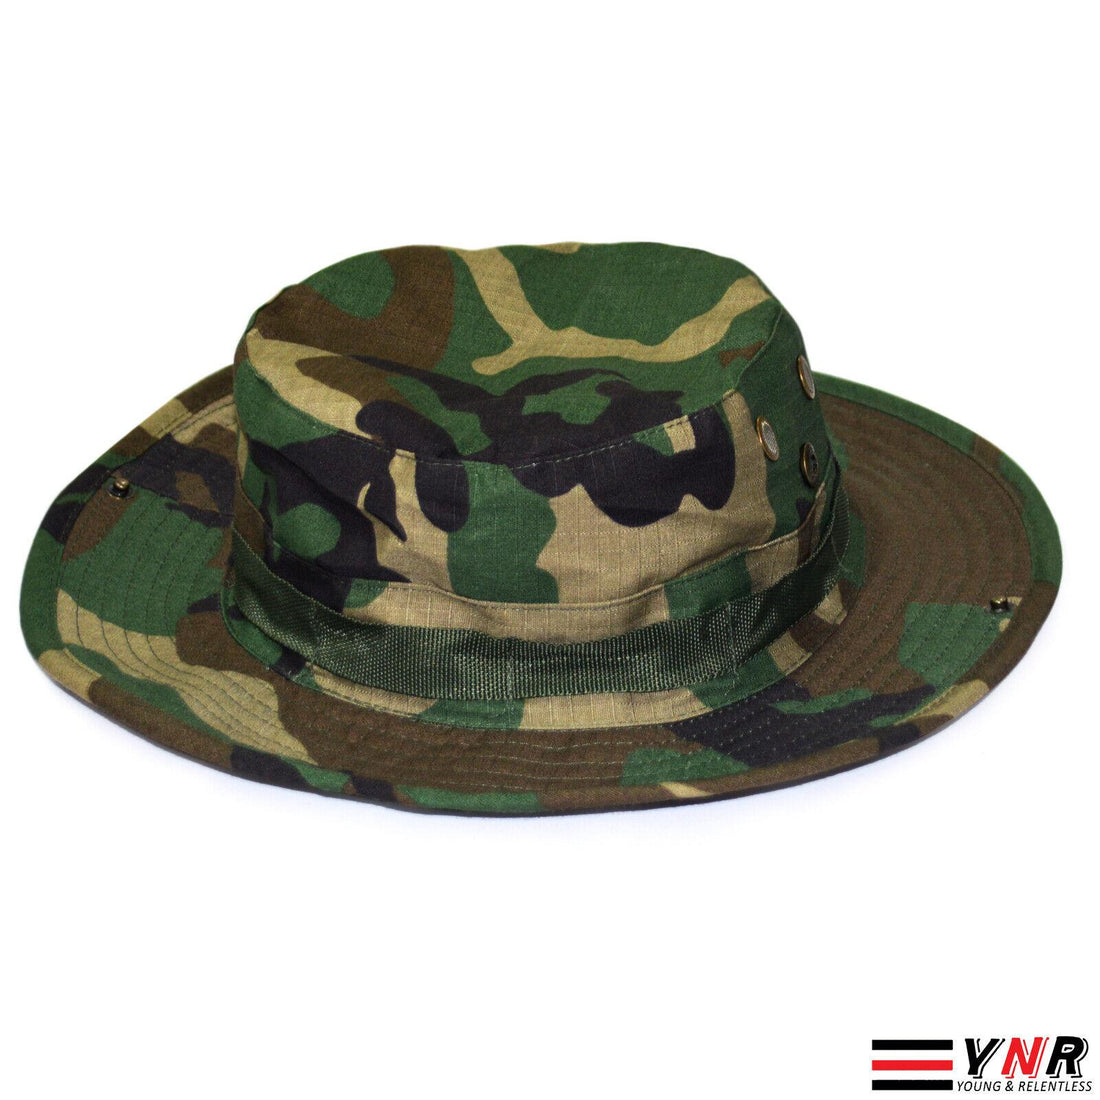 Bush Hat US Army Style Military Combat Camo Sport Camping Game Sun Cover